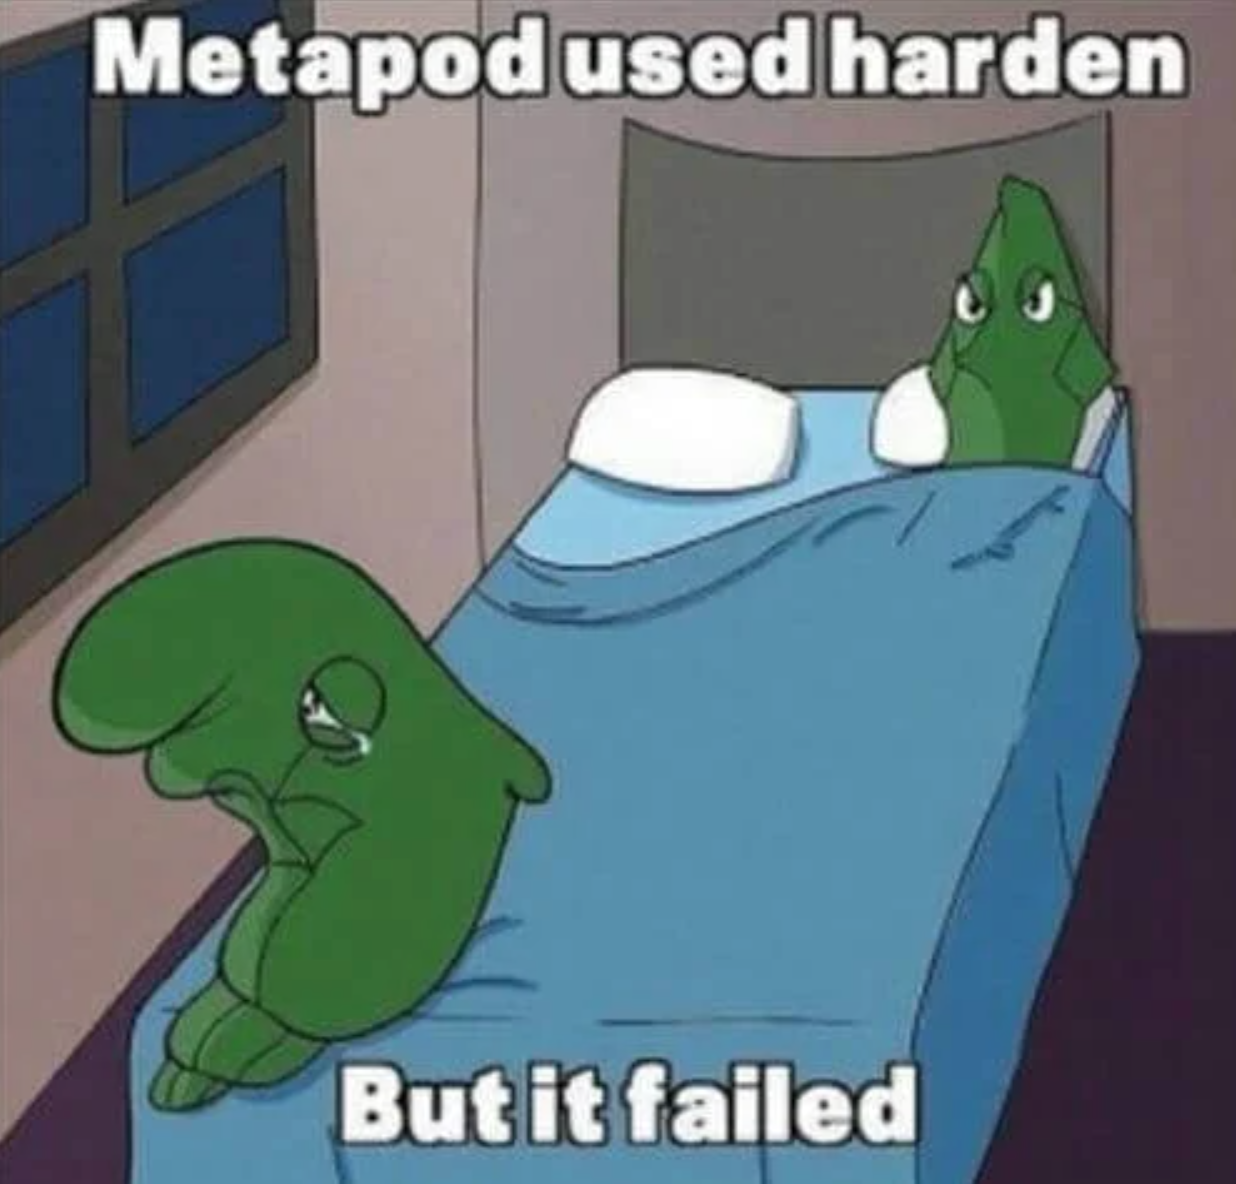 funny gaming memes - metapod used harden gif - Metapod used harden But it failed